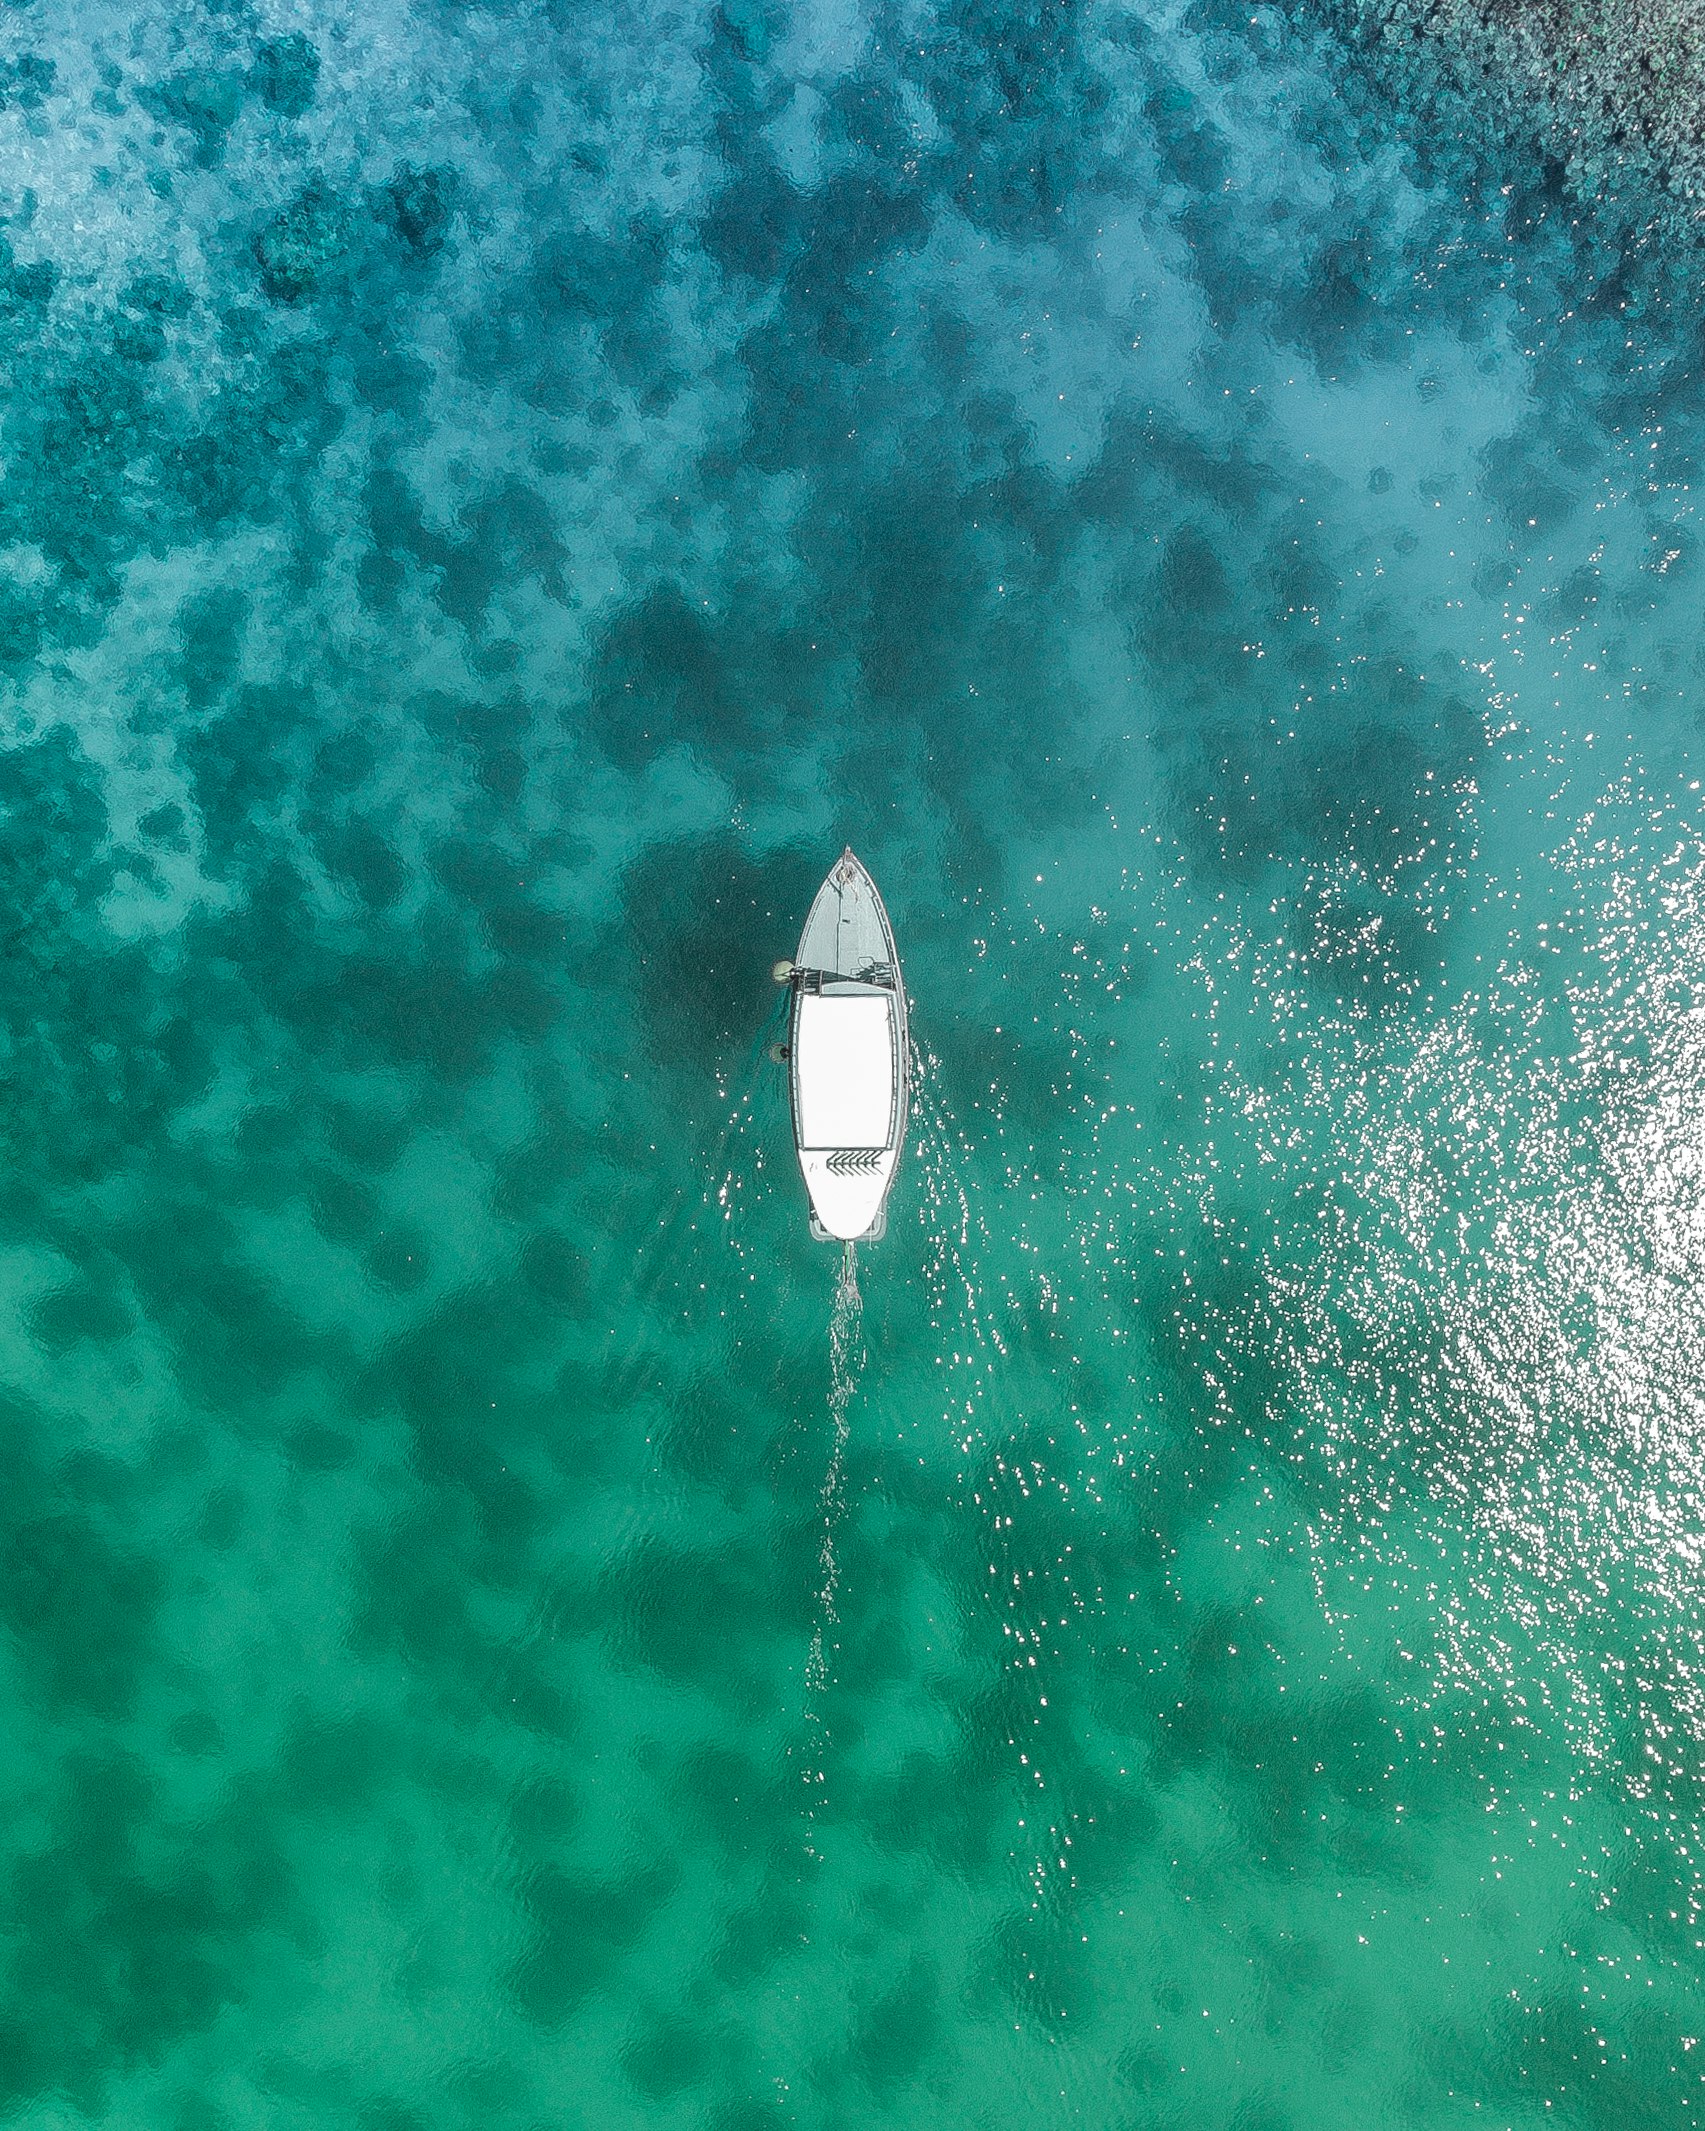 bird's eye view photo of white boat on body of water during daytime